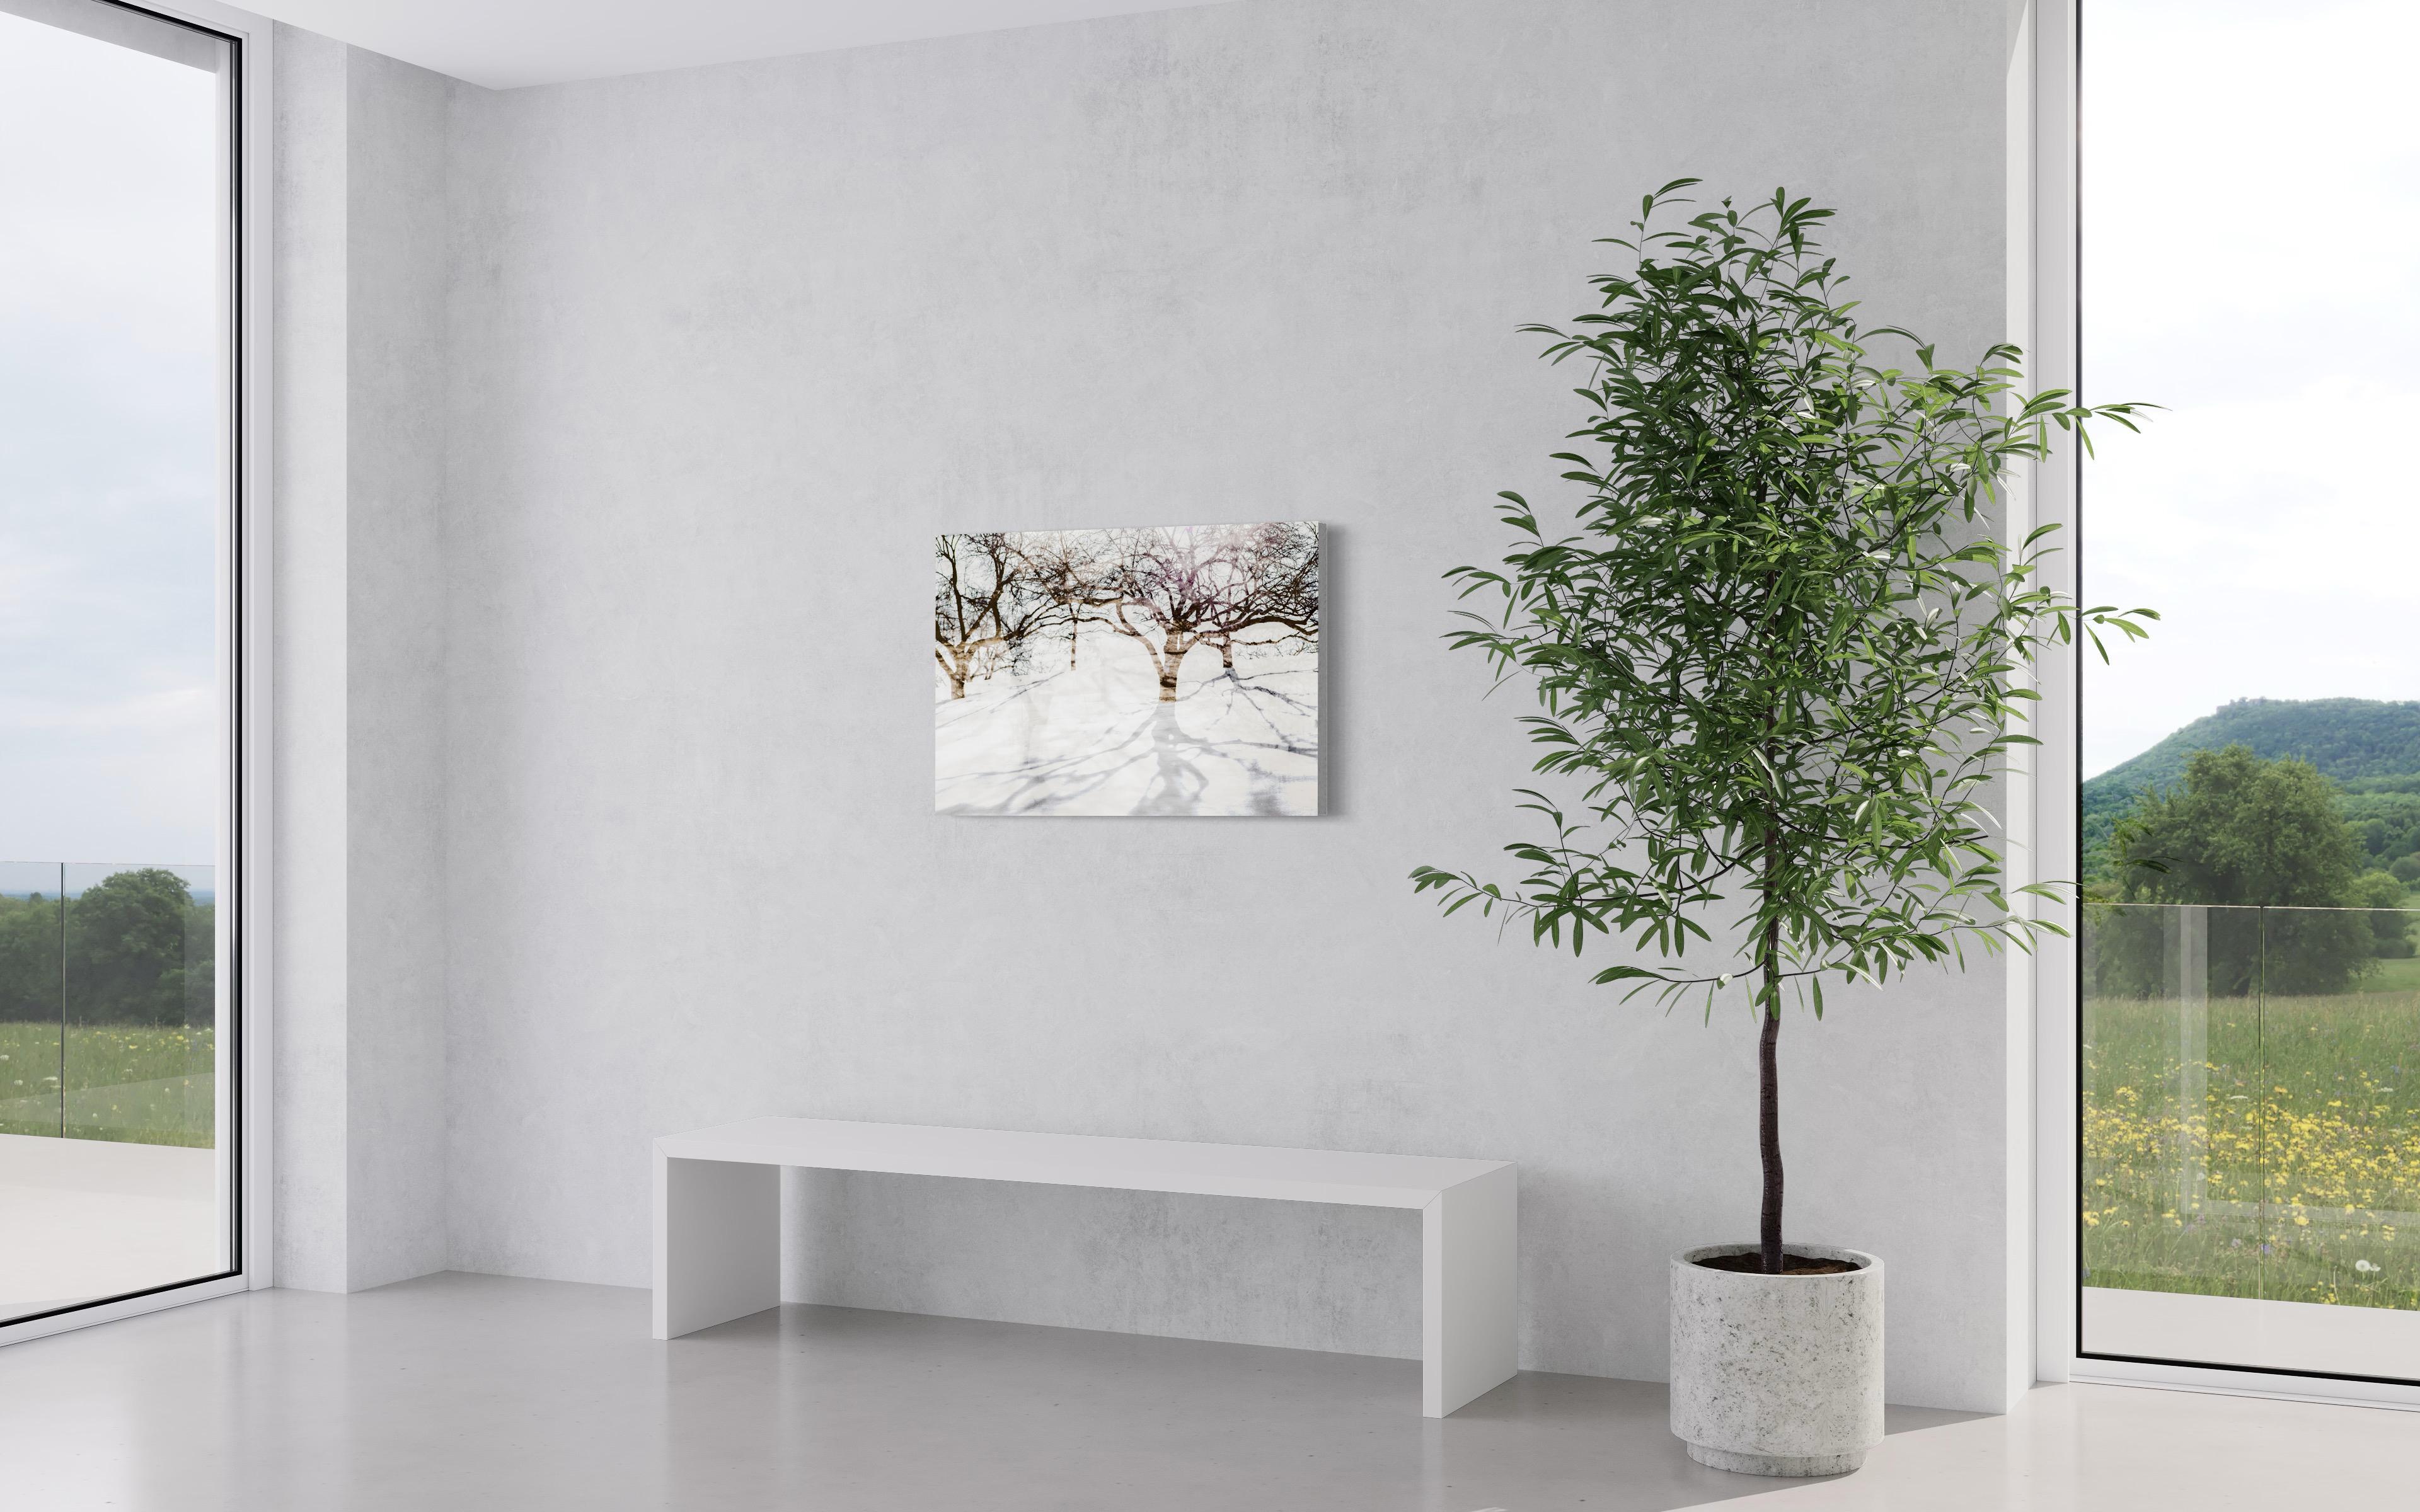 This abstracted landscape photograph by Tori Gagne captures an abstracted view of trees and features a white and brown umber palette. An edition size of 50, this photograph is available as a metal sublimation print with a 1.3” deep silver flush